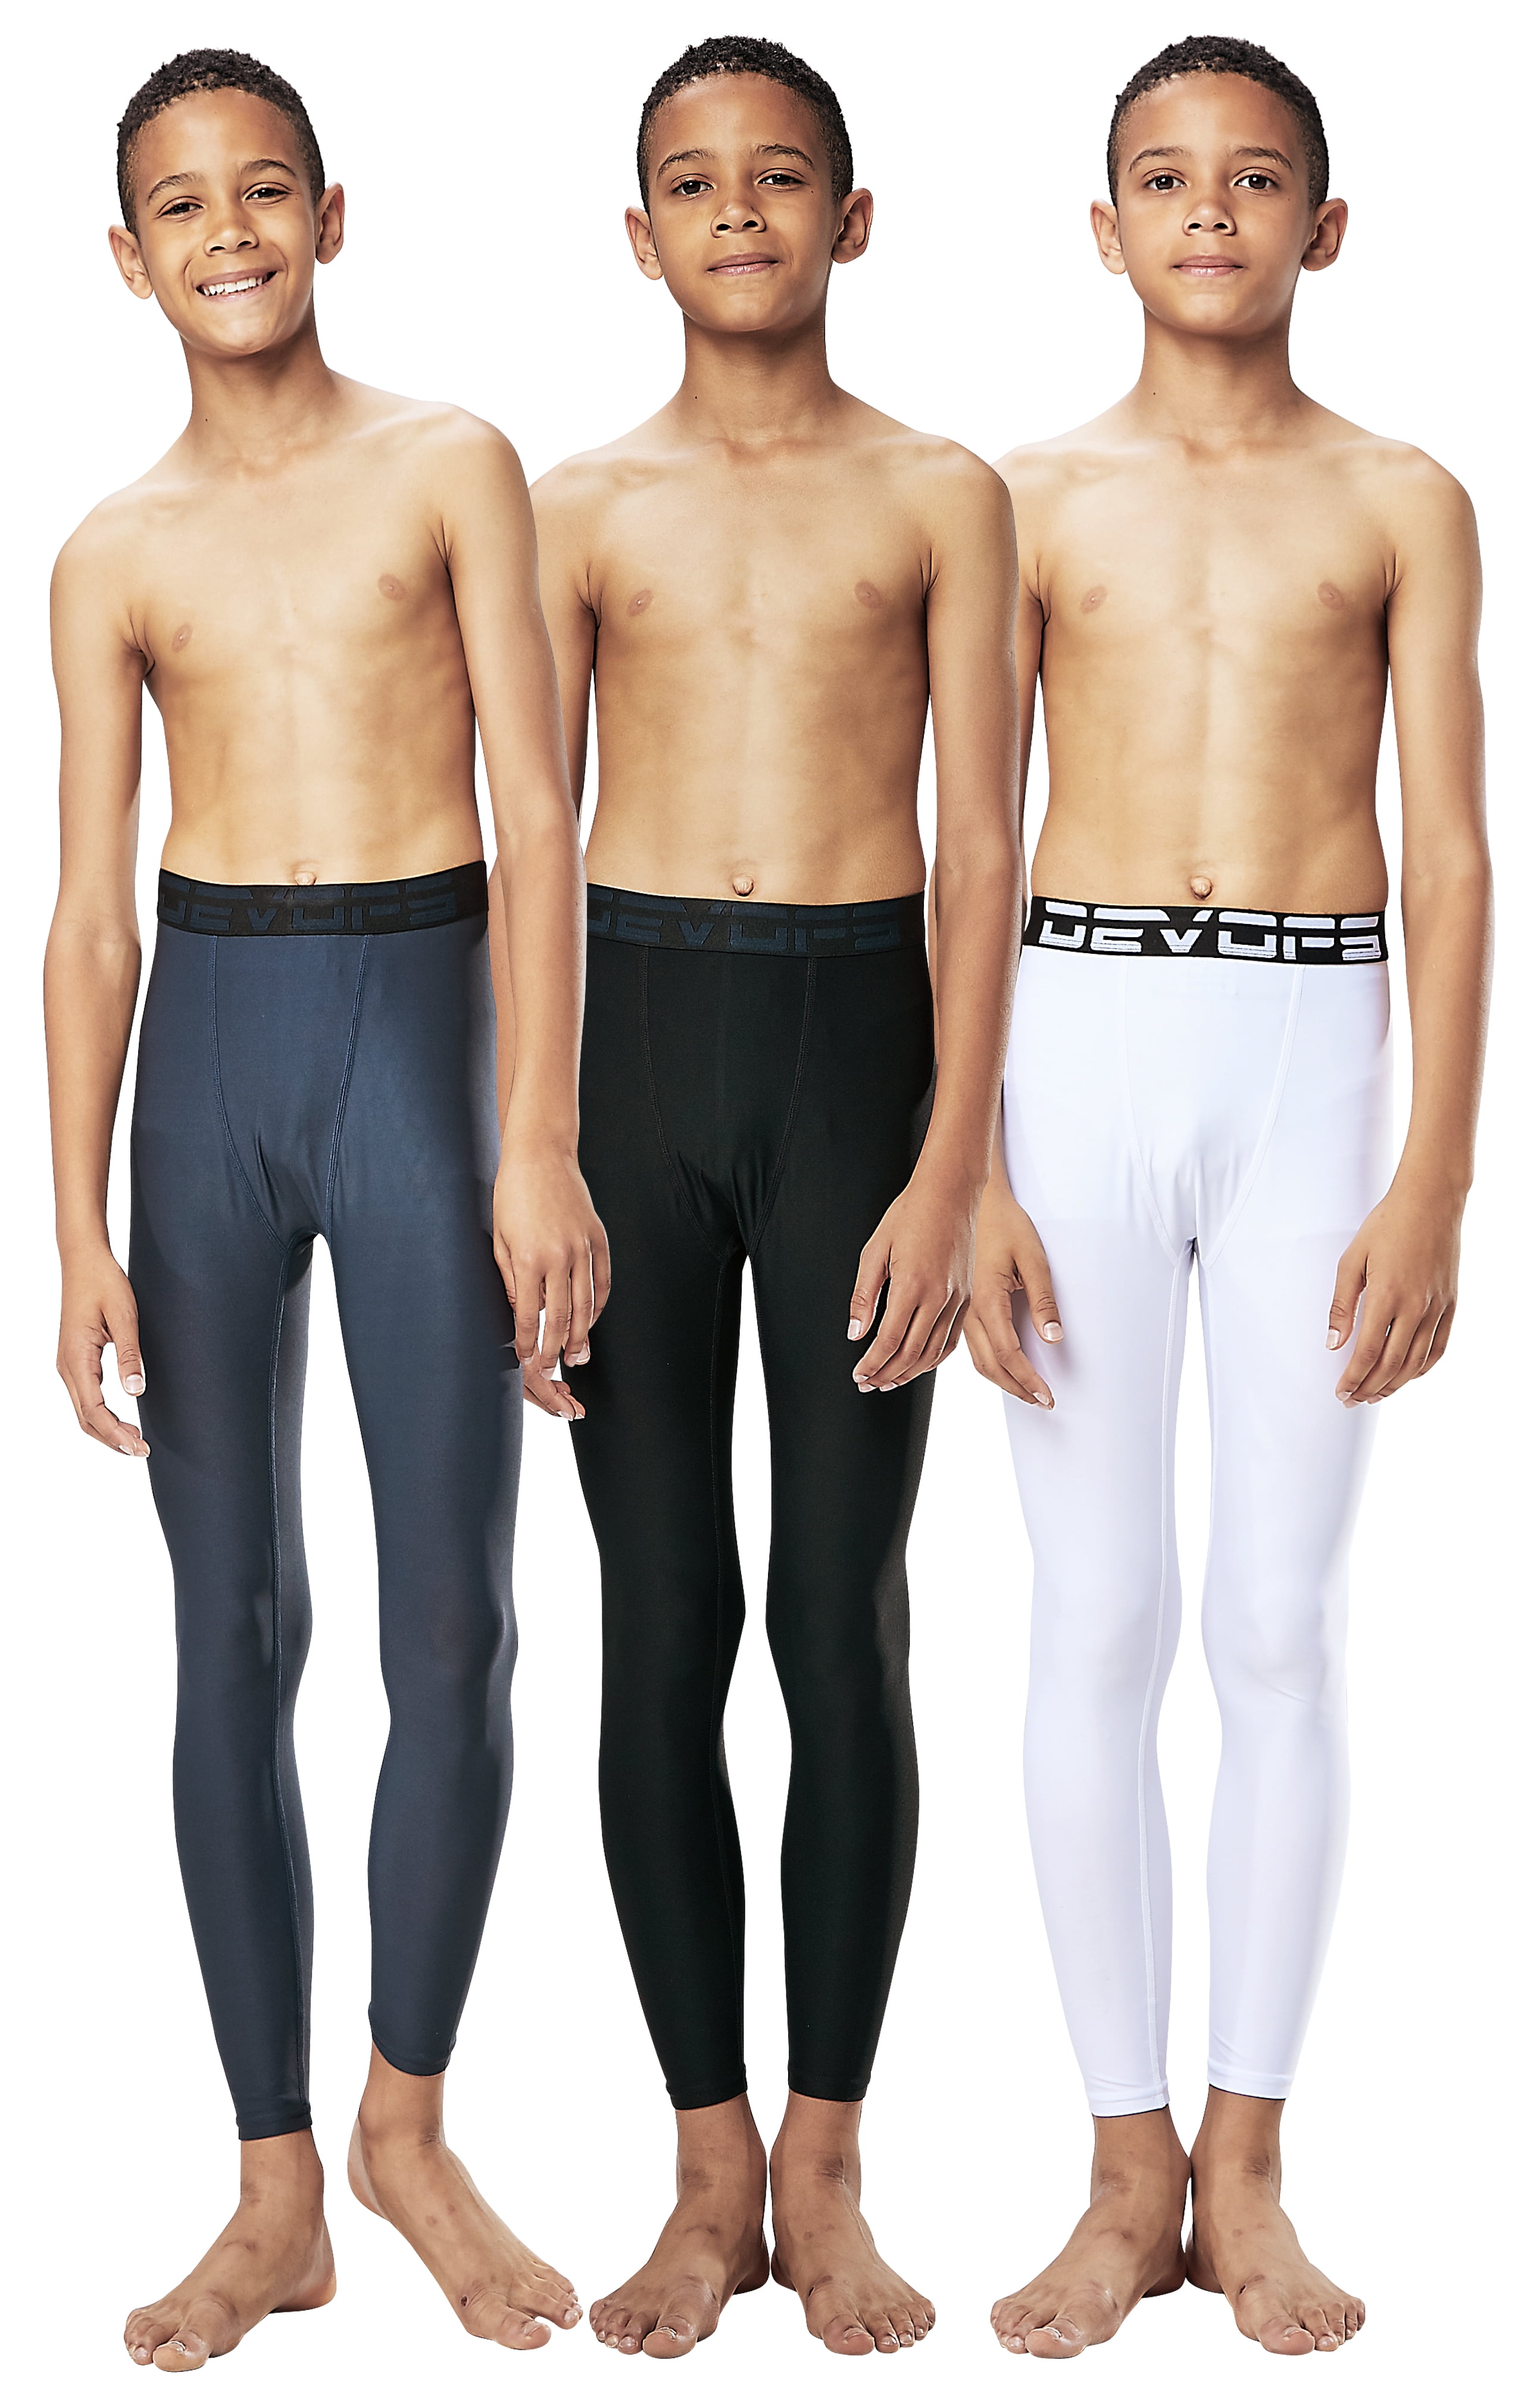 TCA Boys' Youth and Men's Pro Performance Compression Leggings